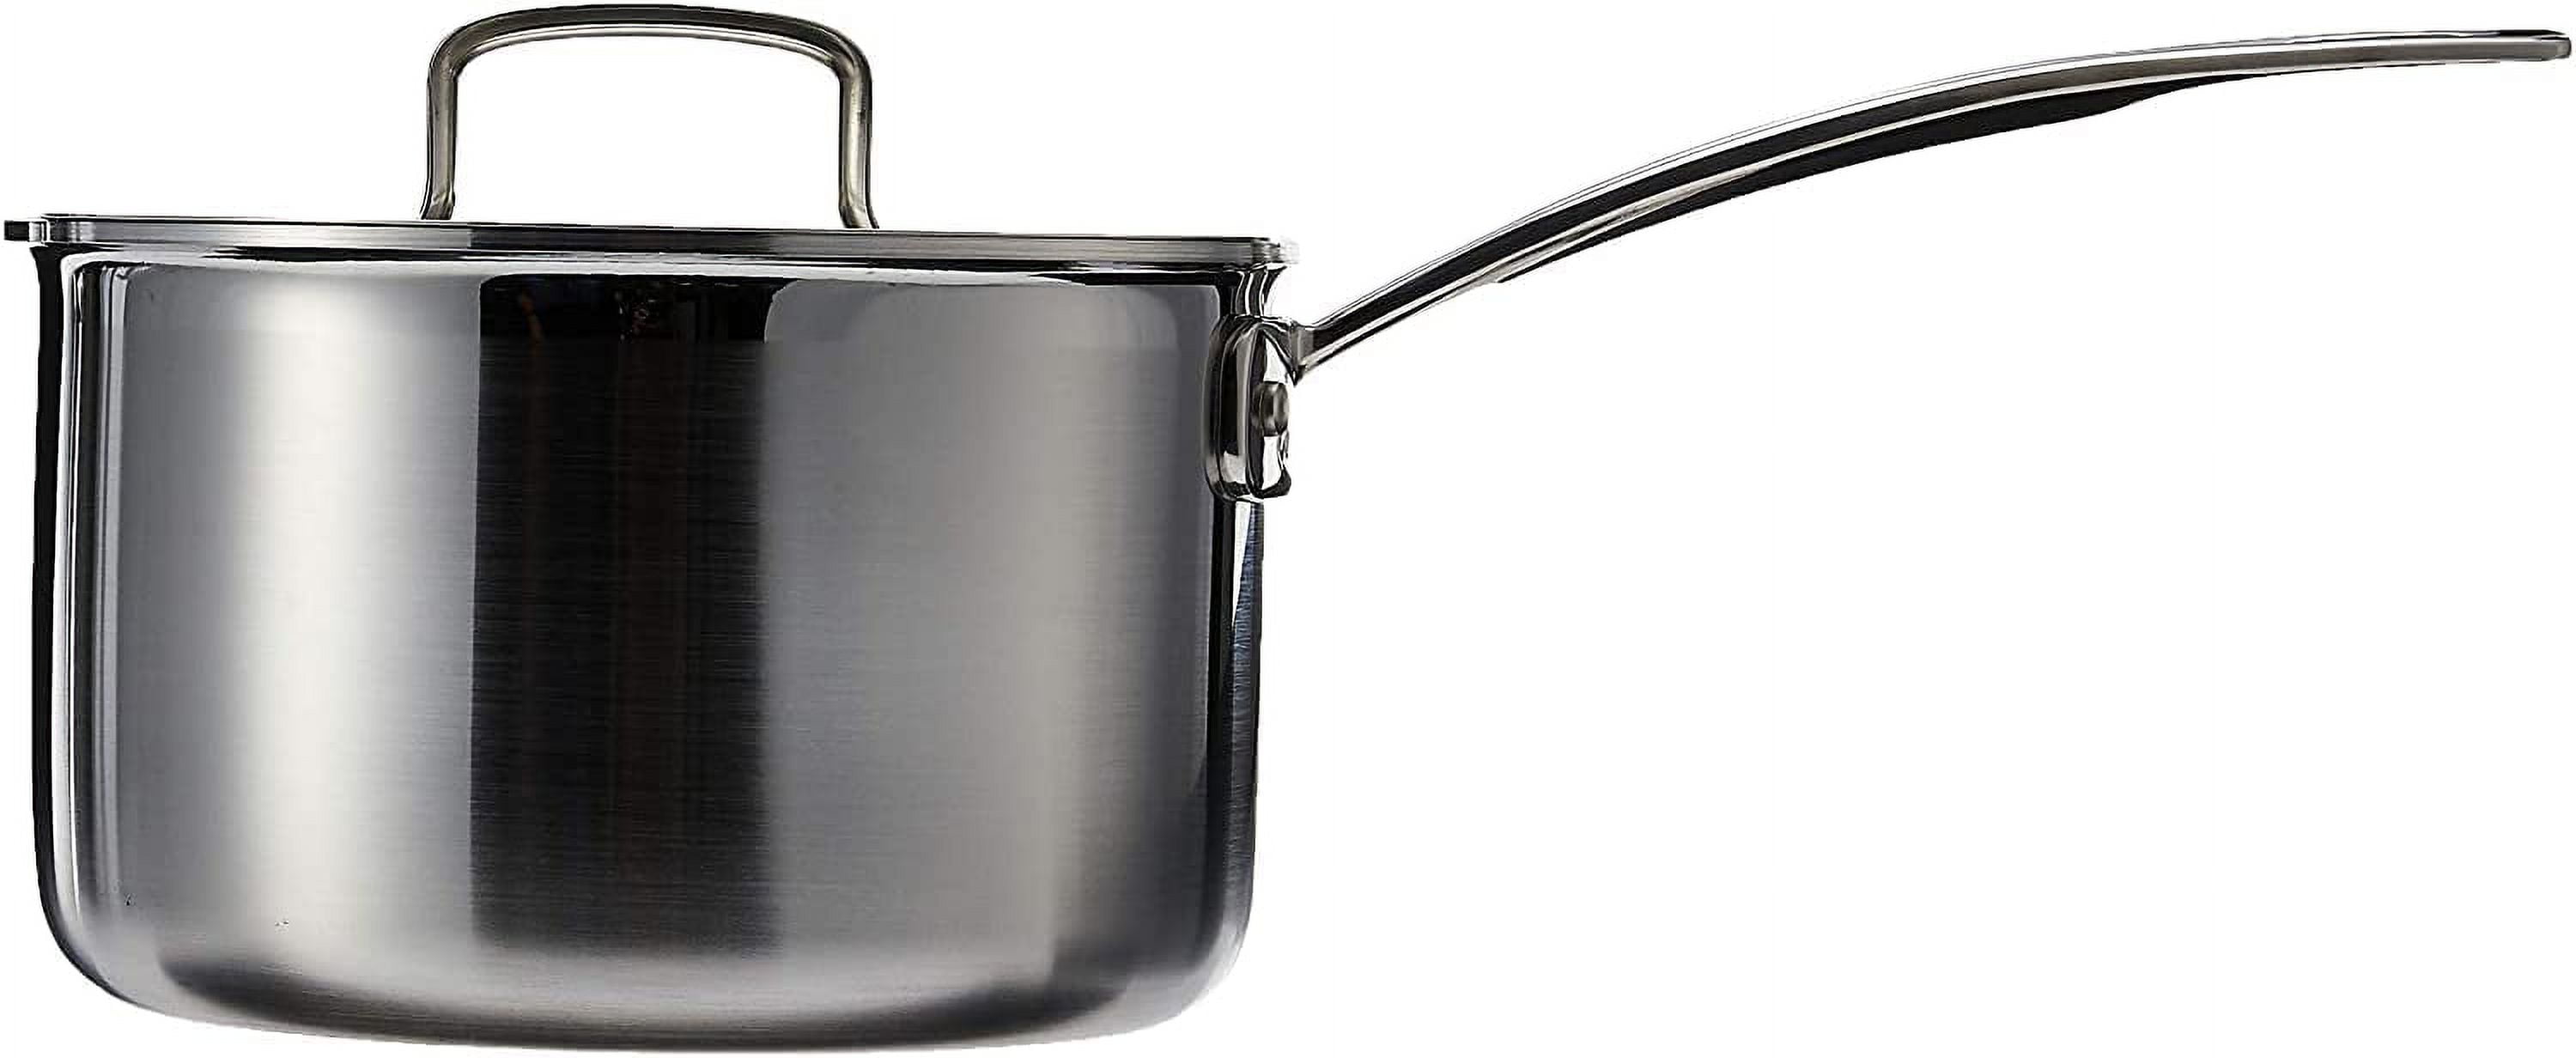 MultiClad Pro Triple Ply Stainless Cookware 3 Quart Saucepan